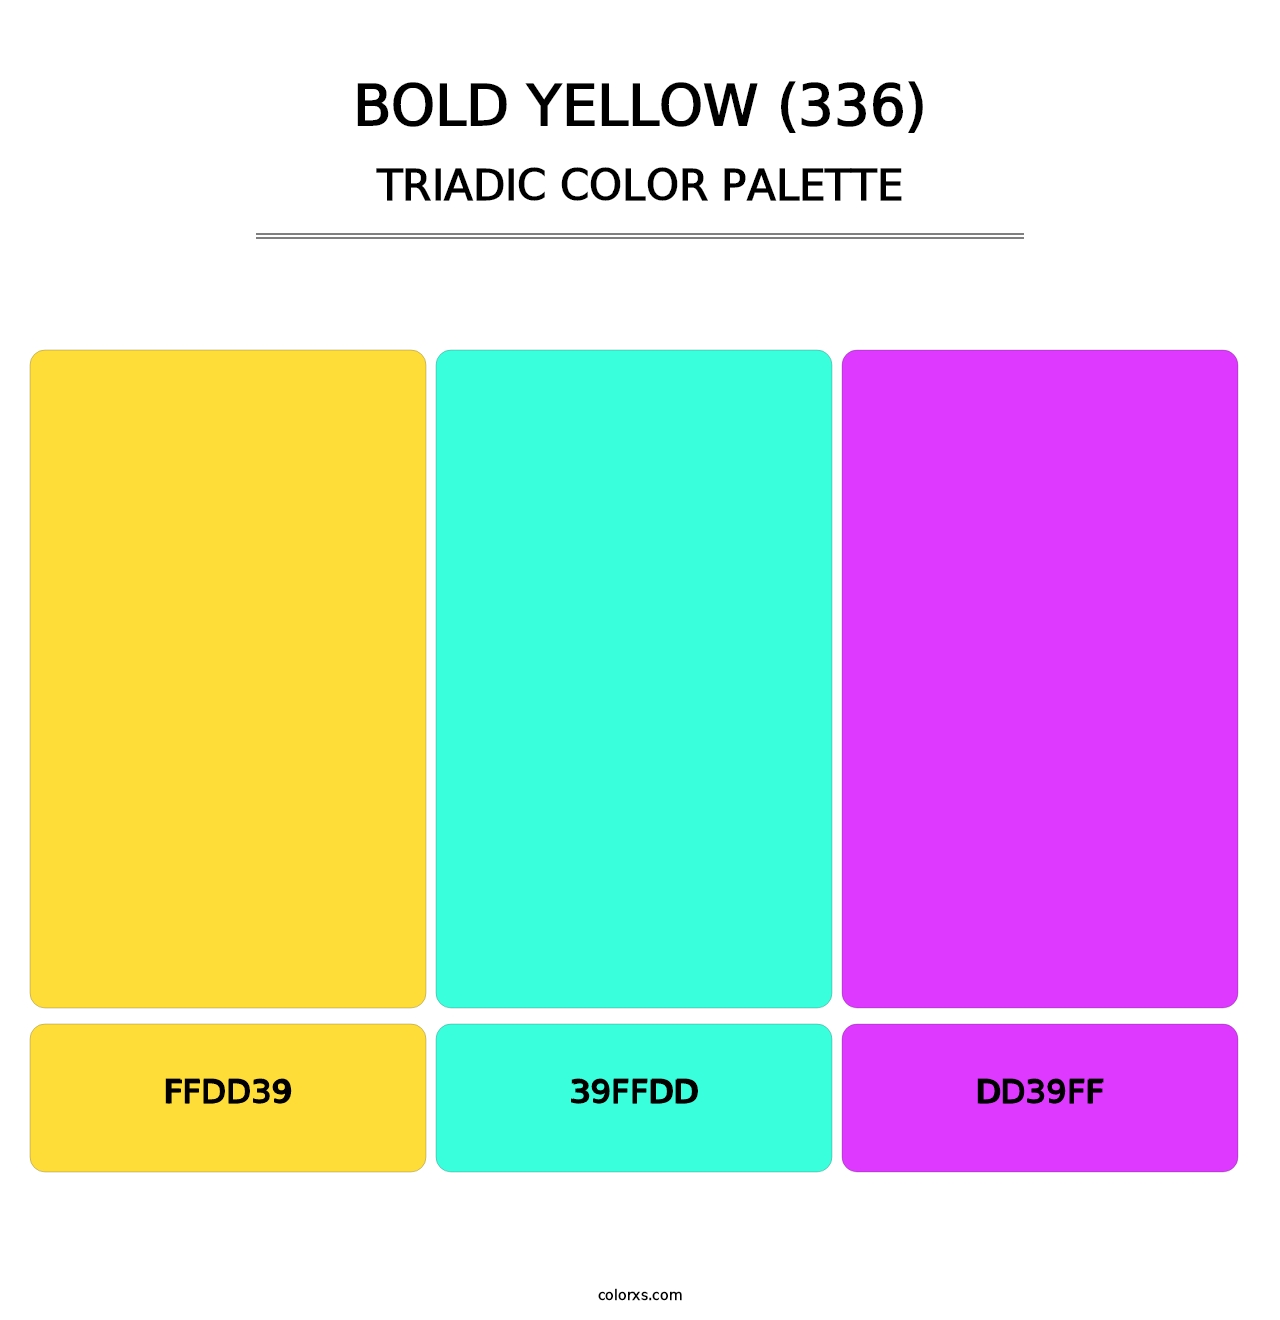 Bold Yellow (336) - Triadic Color Palette